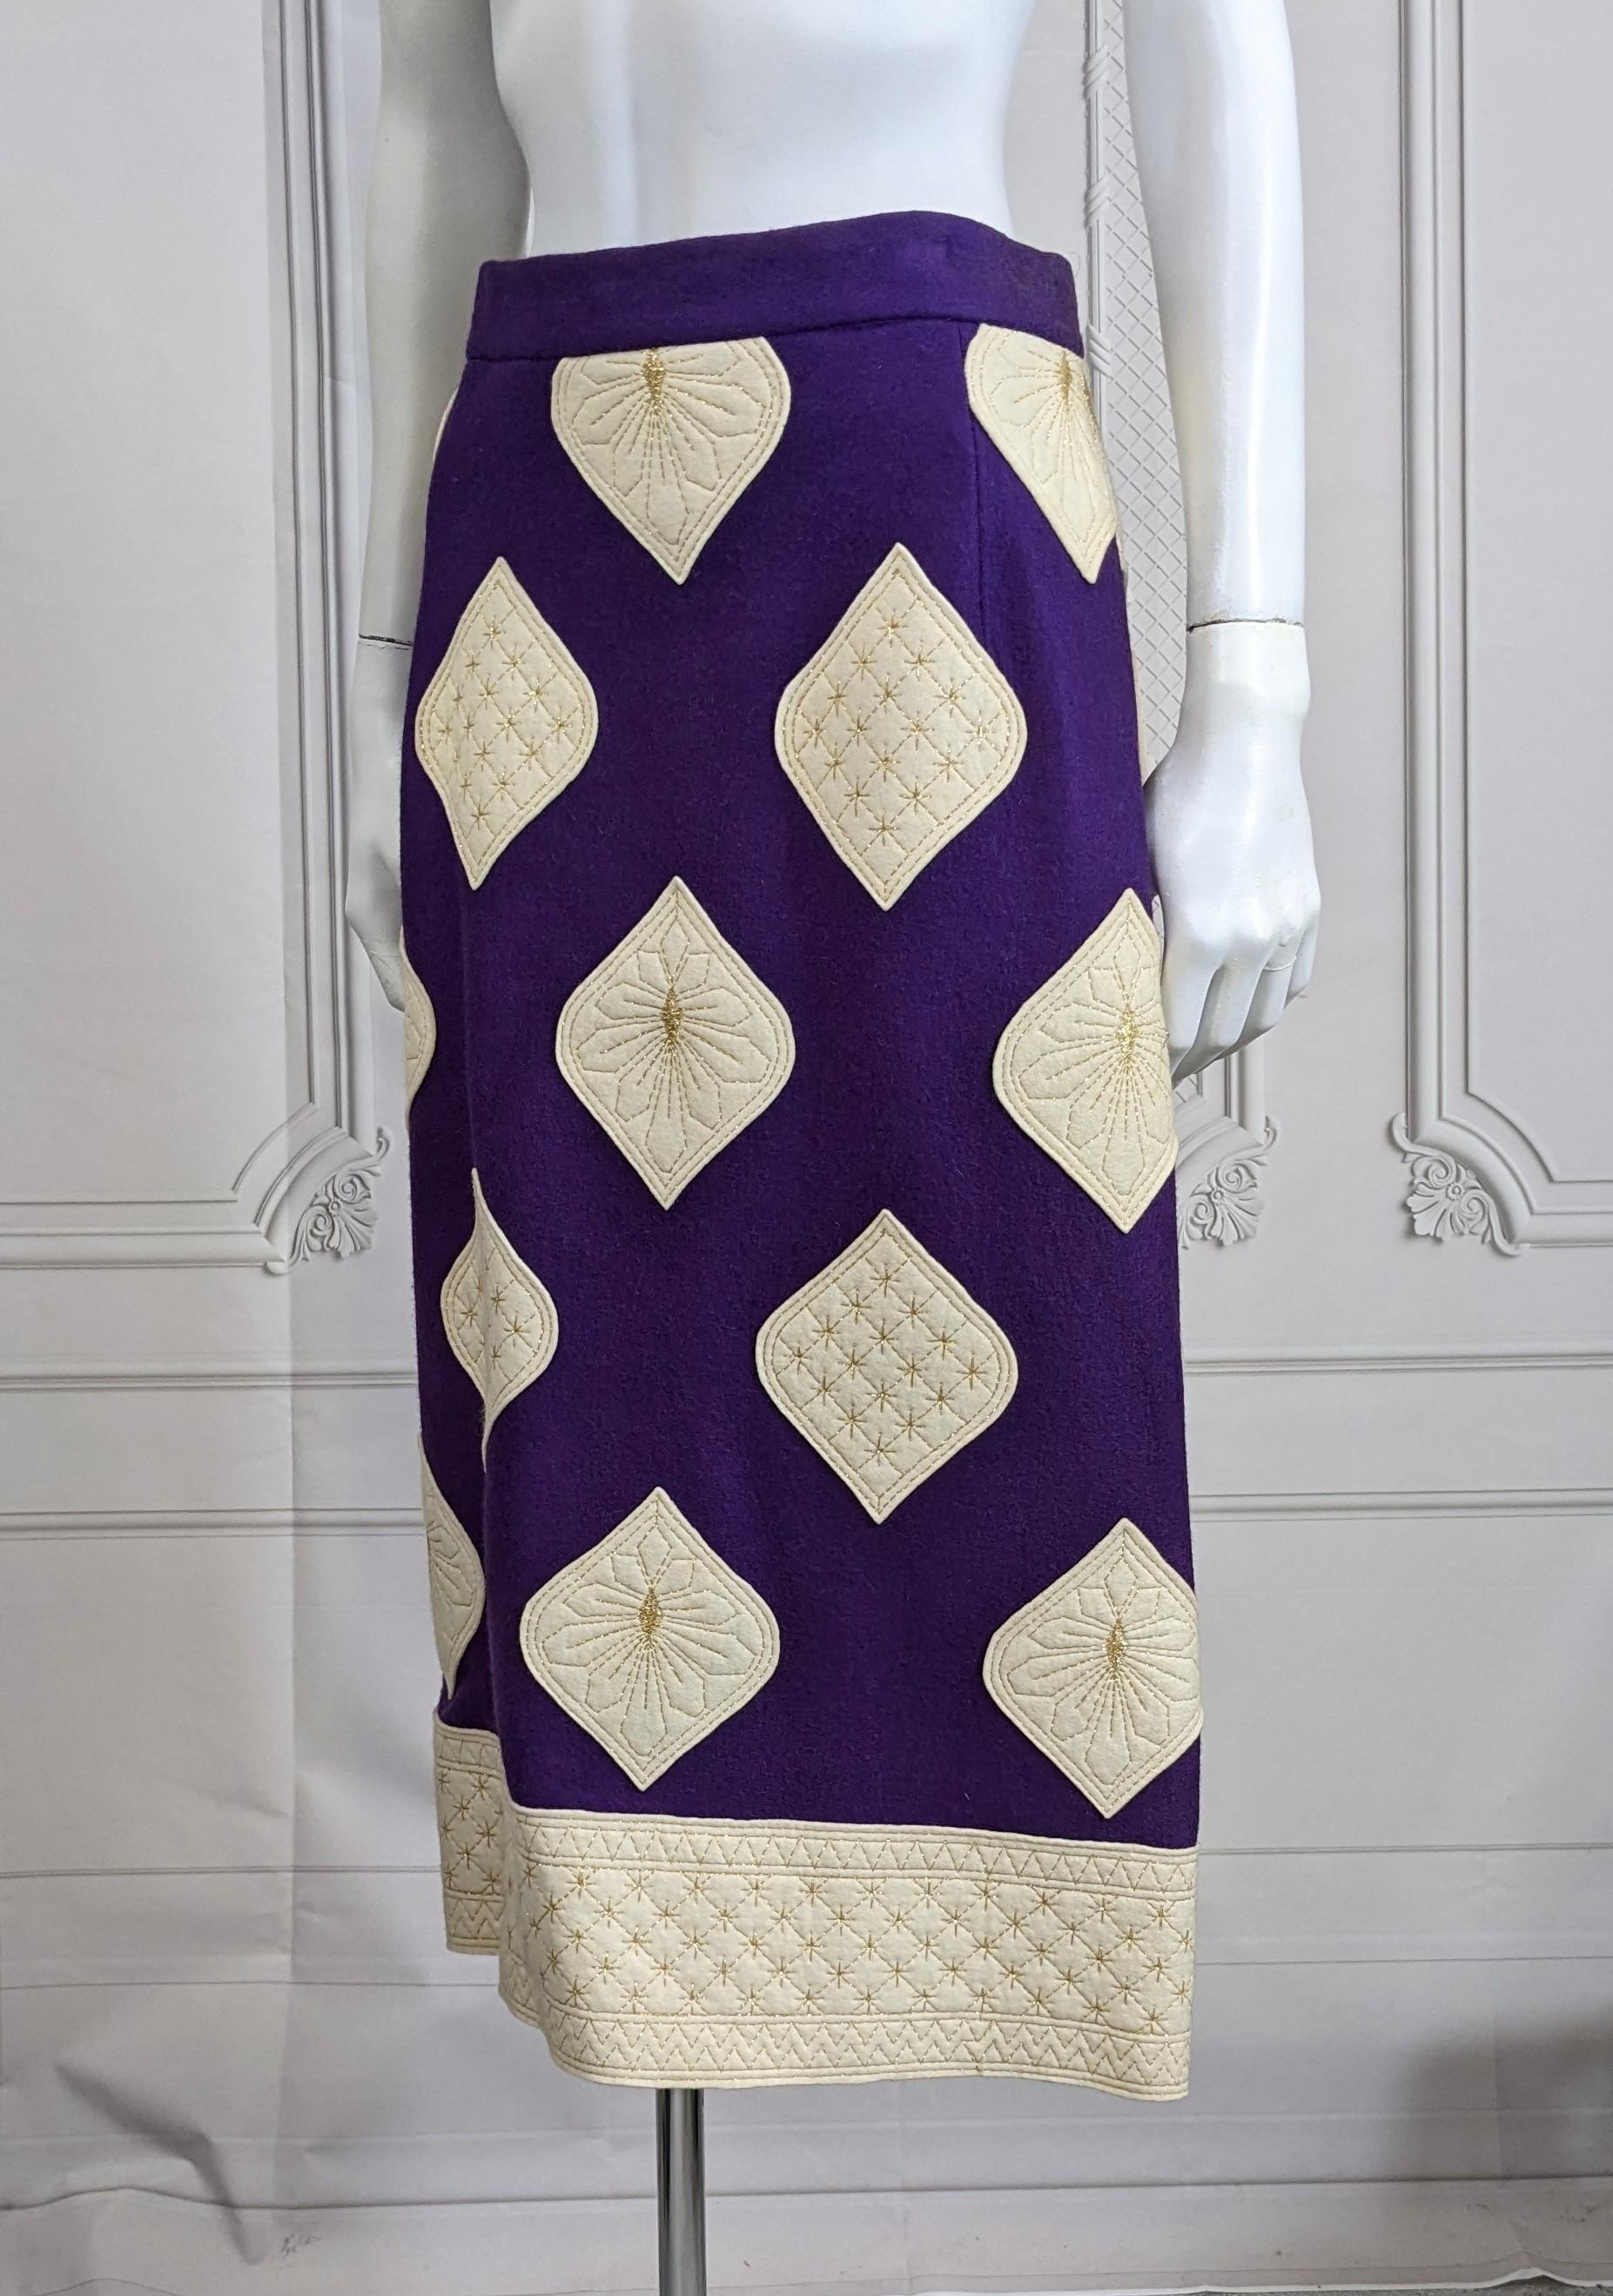 Graphic Malcolm Starr by Morton Myles Wool Felt Applique Flare Skirt from the 1970's. Purple wool felt is appliqued with white motifs topstitched with gold thread with a Middle Eastern vibe. Vintage size 12. Smaller modern size.